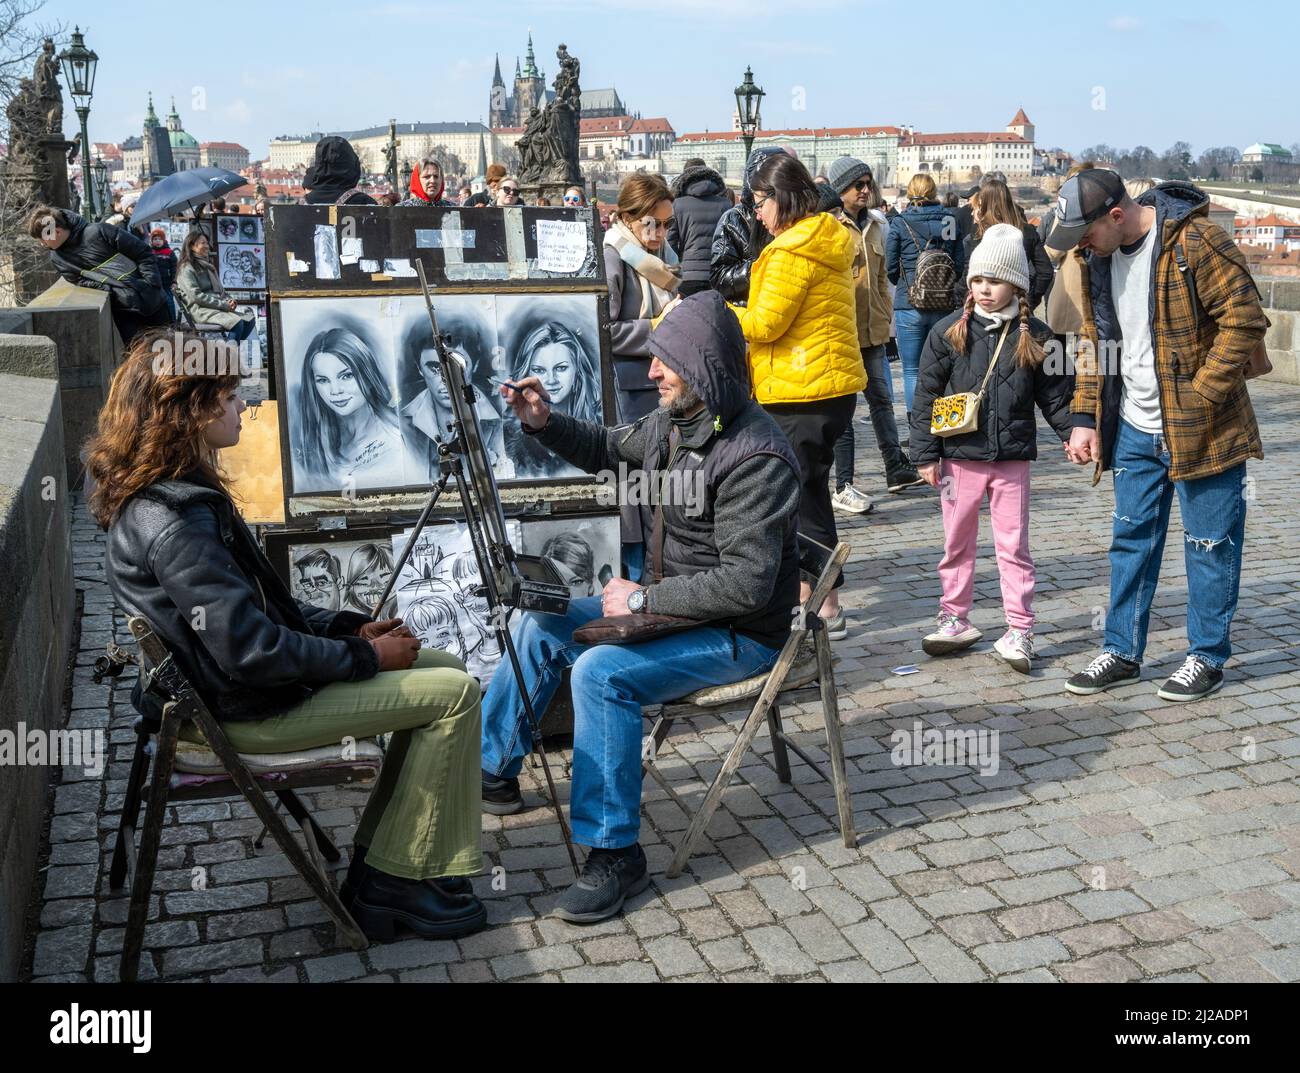 A street artist drawing a picture of a tourist at The Charles Bridge, Prague, Czech Republic. Stock Photo